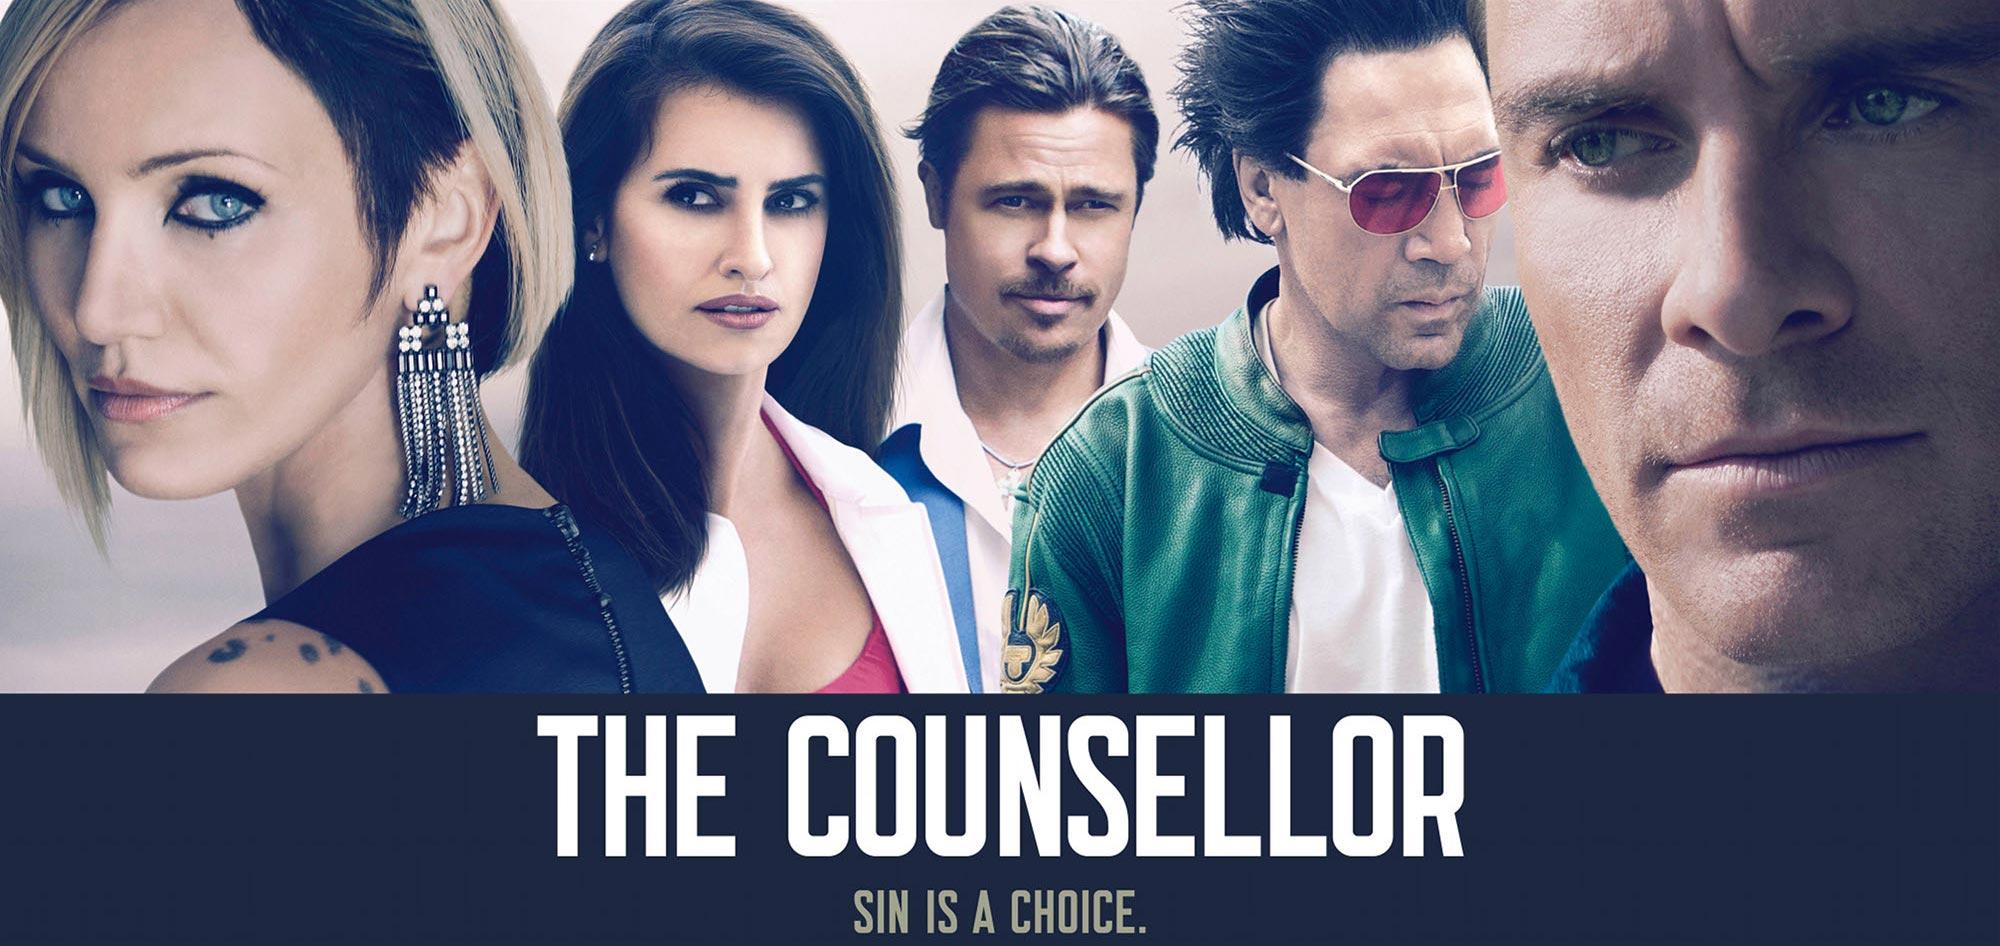 The Counselor #23